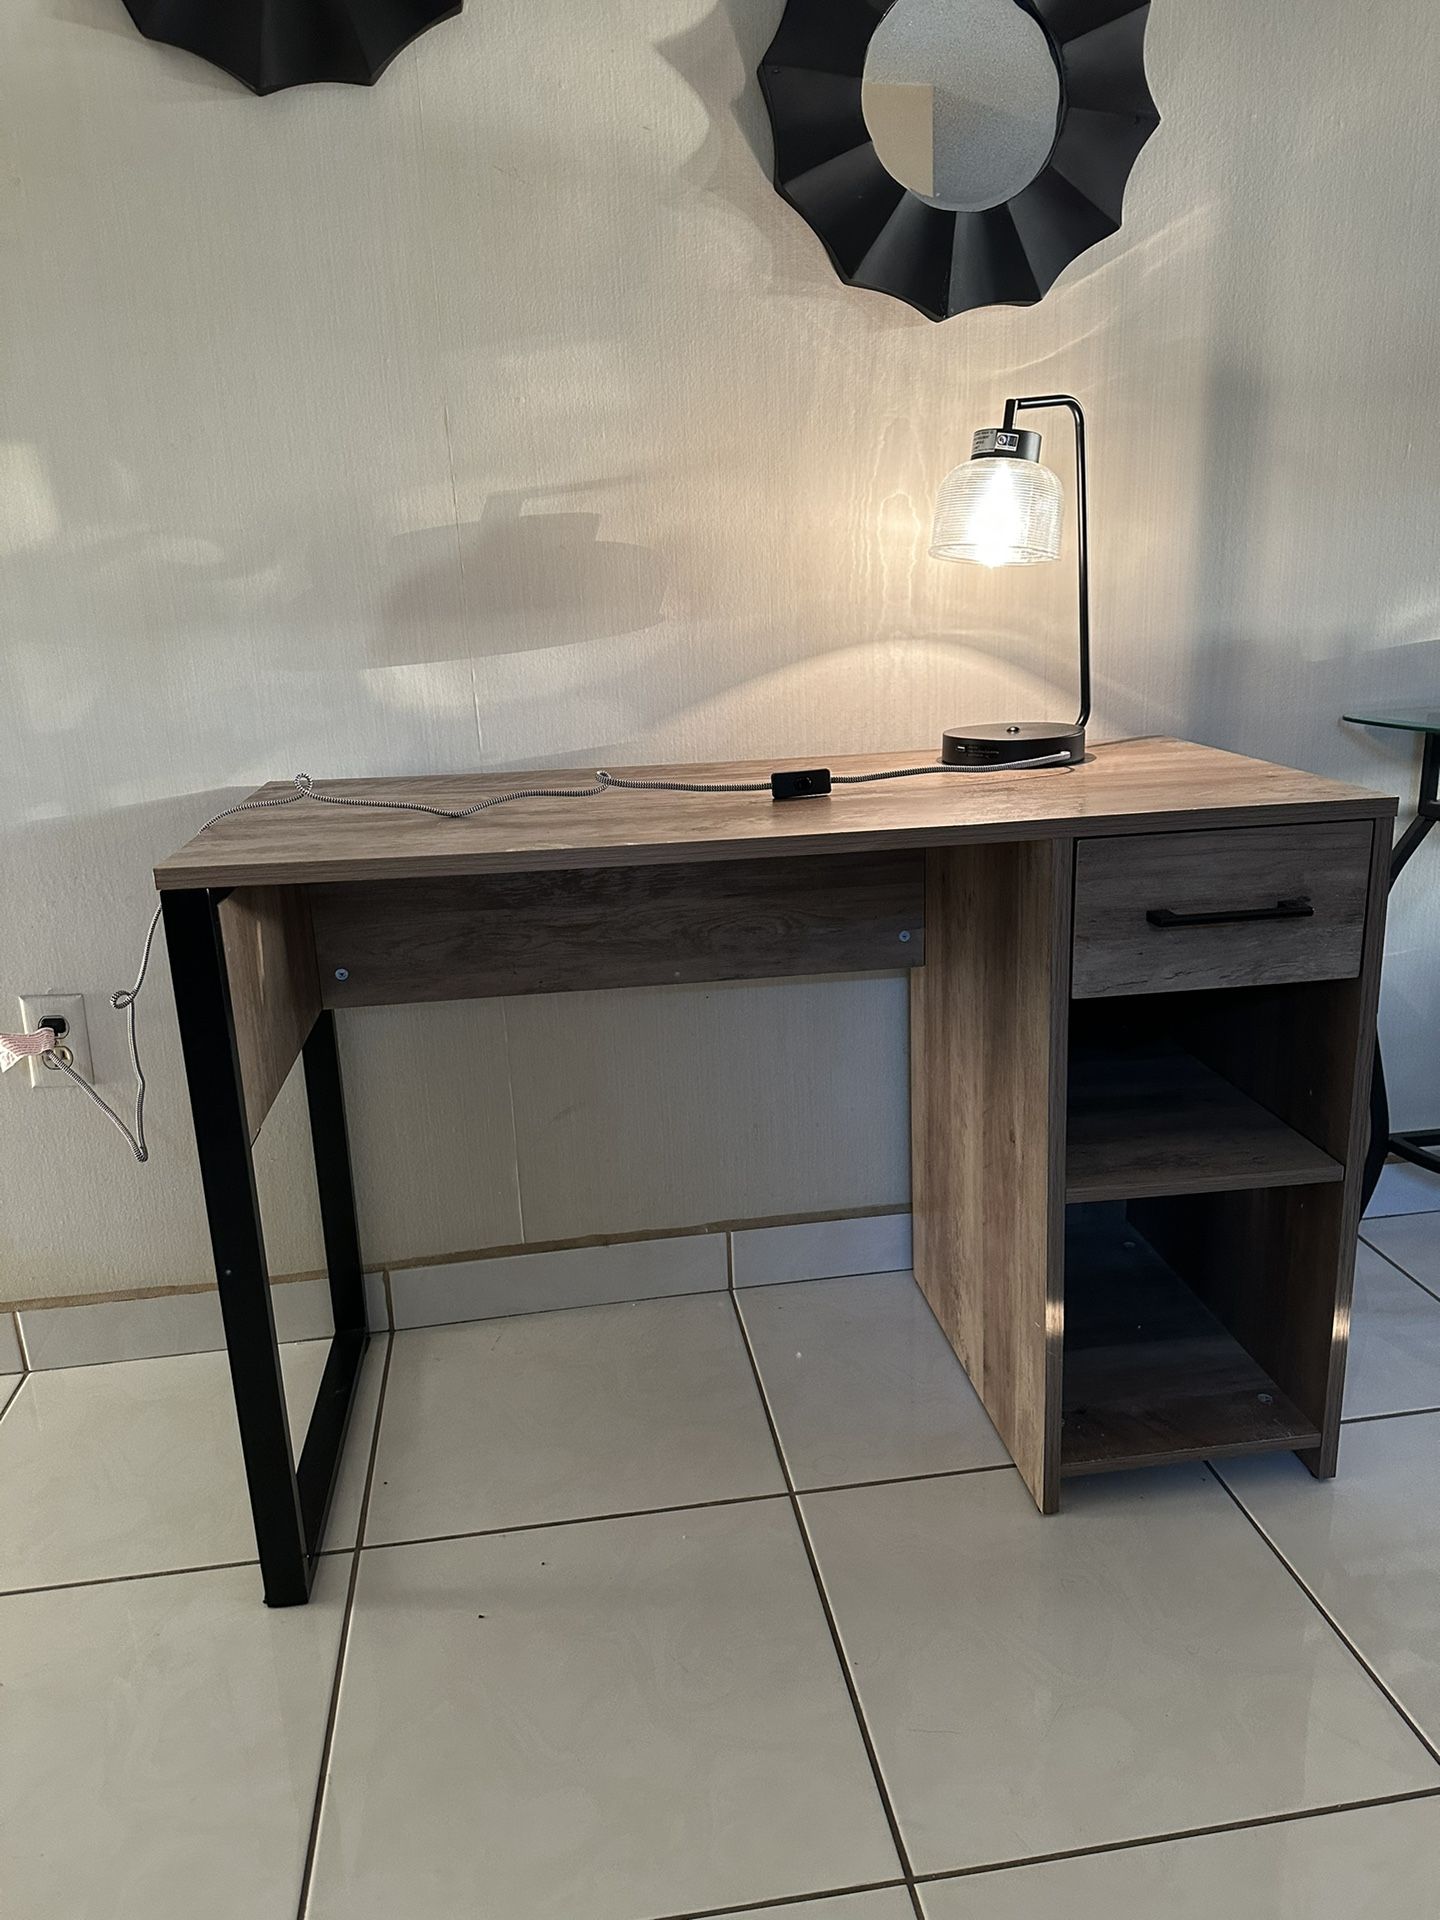 Modern Wood Desk With Lamp